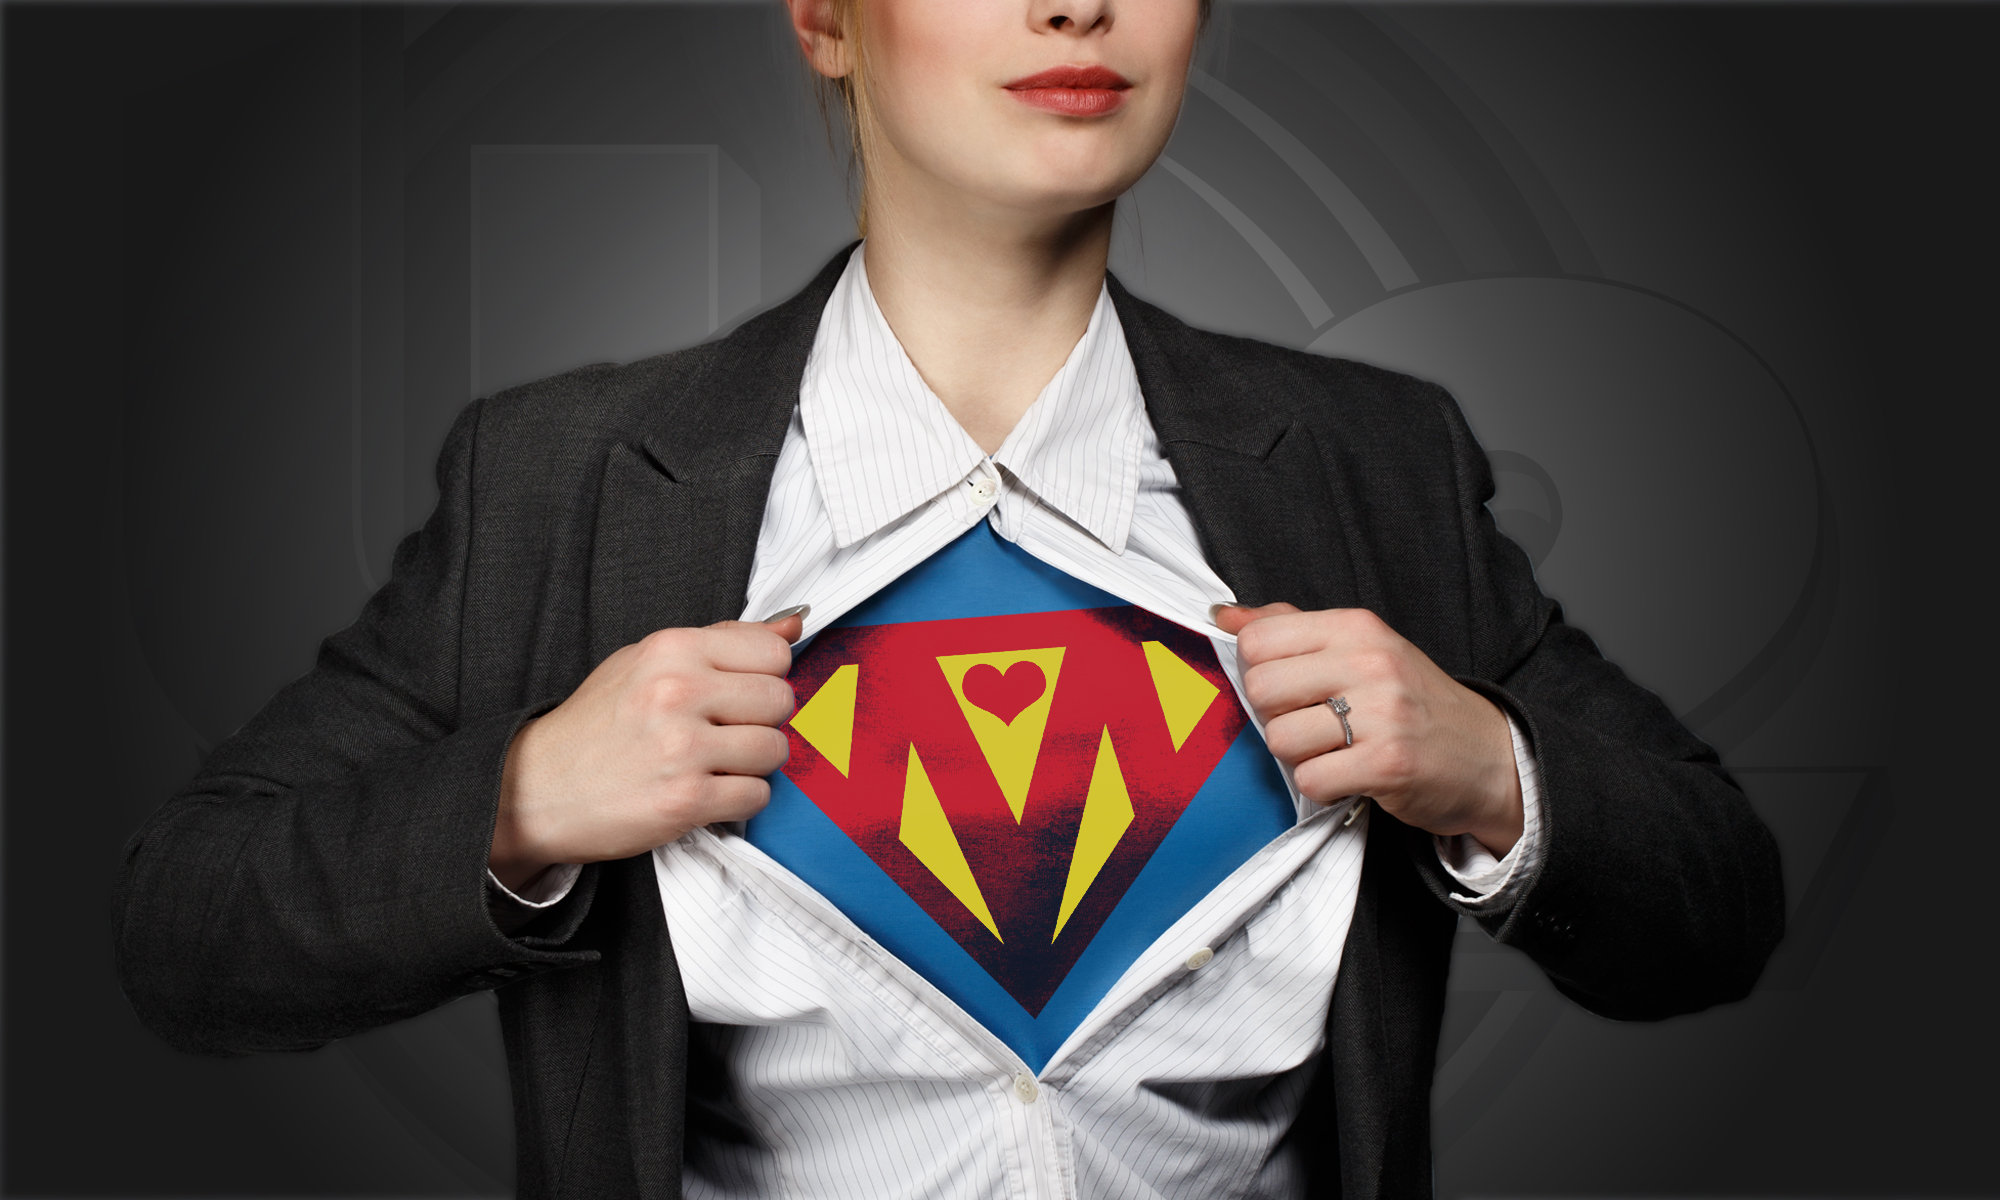 A working woman becomes a supermom